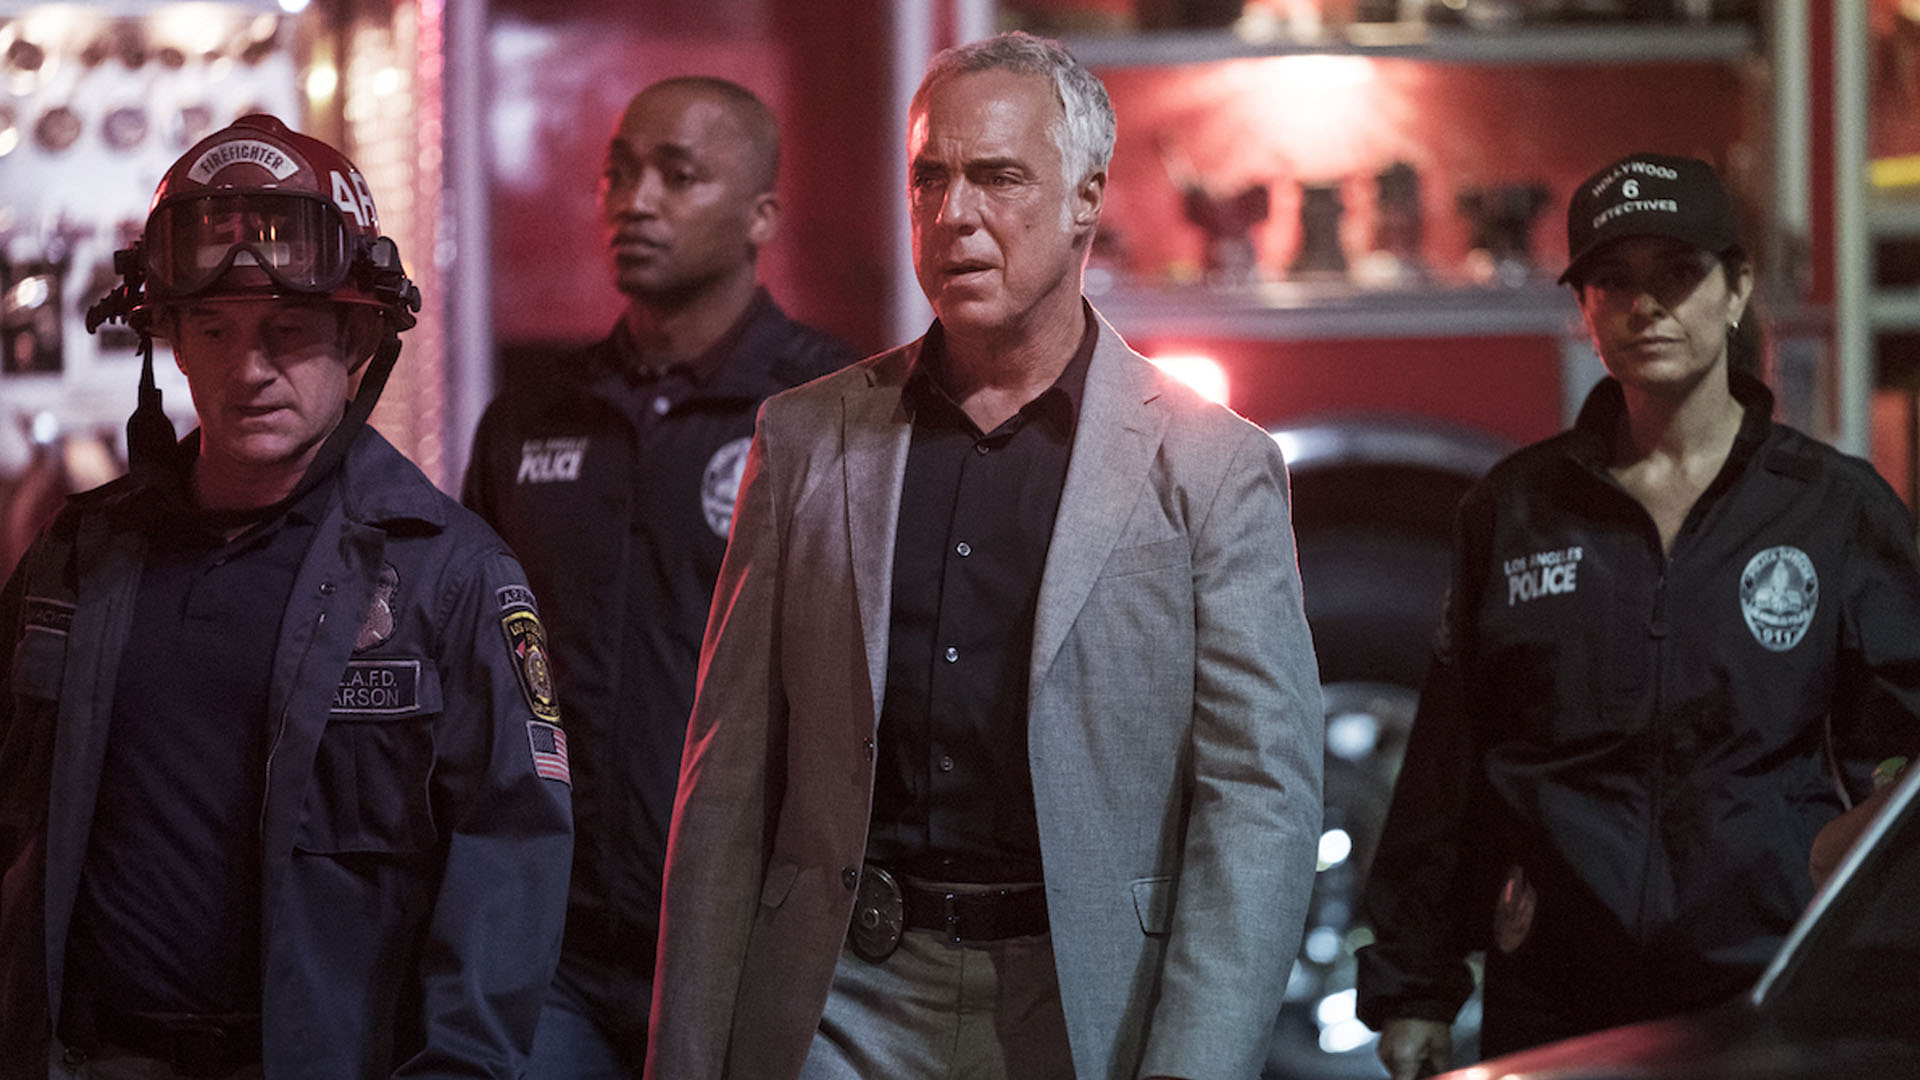 Bosch: Legacy Releasing Soon - Is it Free to stream online? - Daily ...